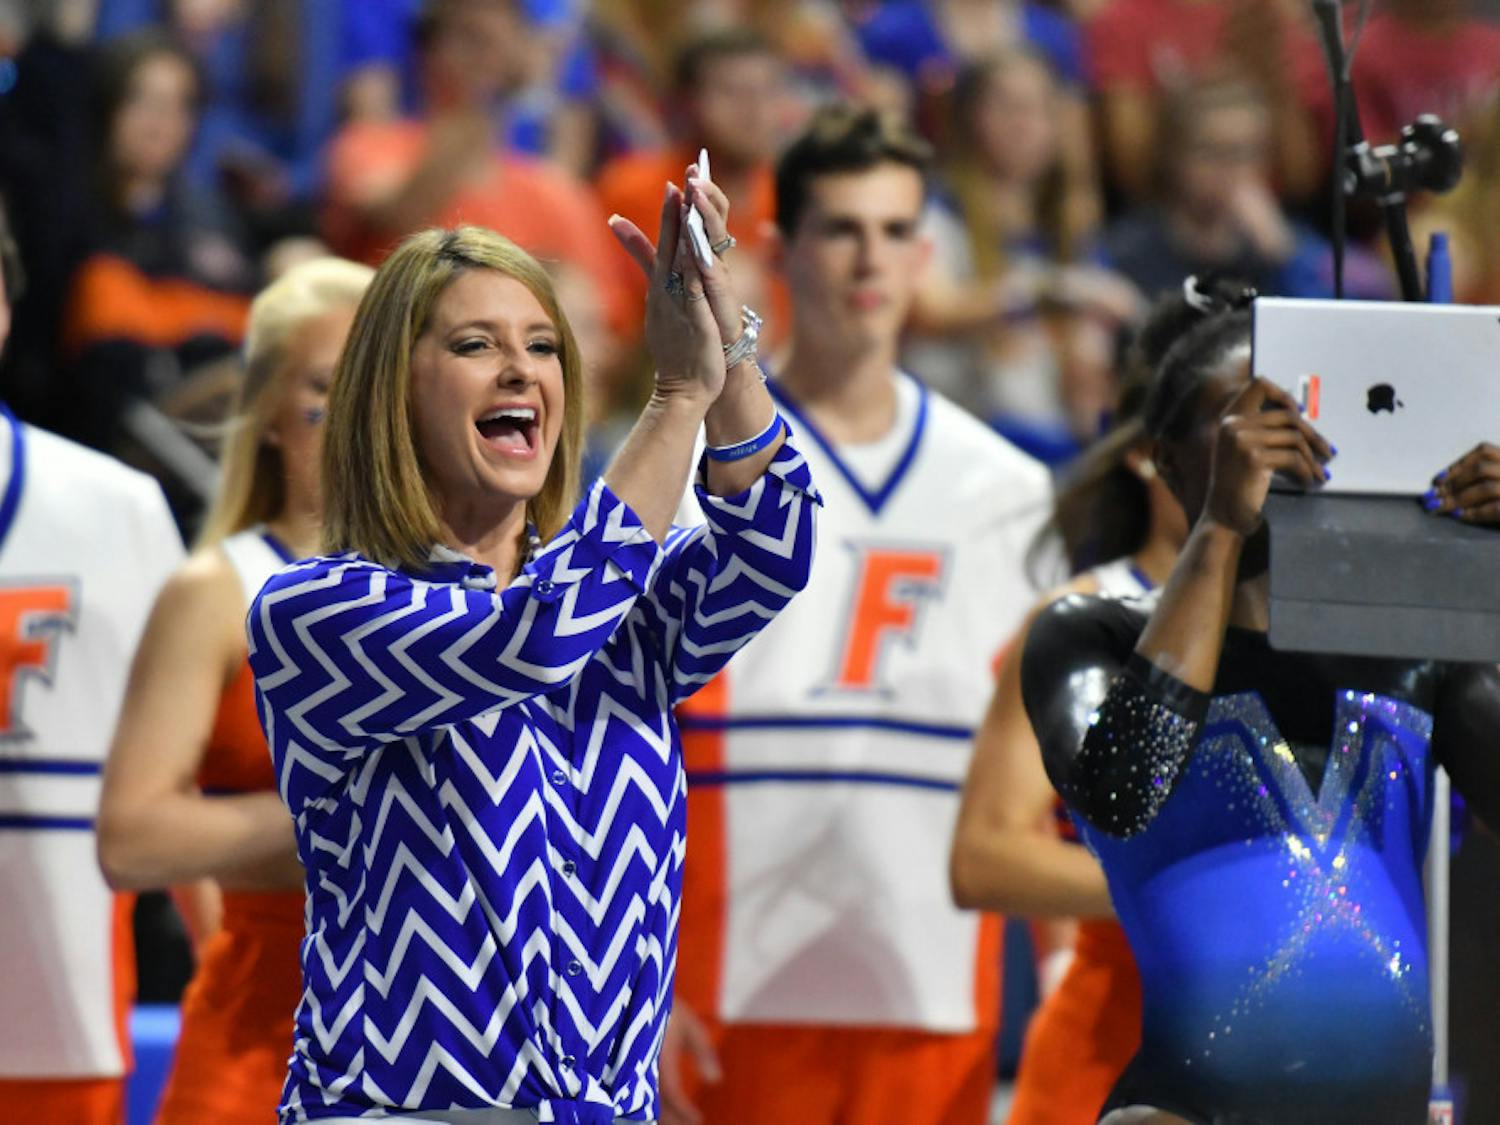 Gymnastics coach Jenny Rowland said she wasn't thinking too much on her team's loss to LSU but instead was looking forward to tonight's matchup against Kentucky. “I’m not one to look back and dwell from day to day,” she said.